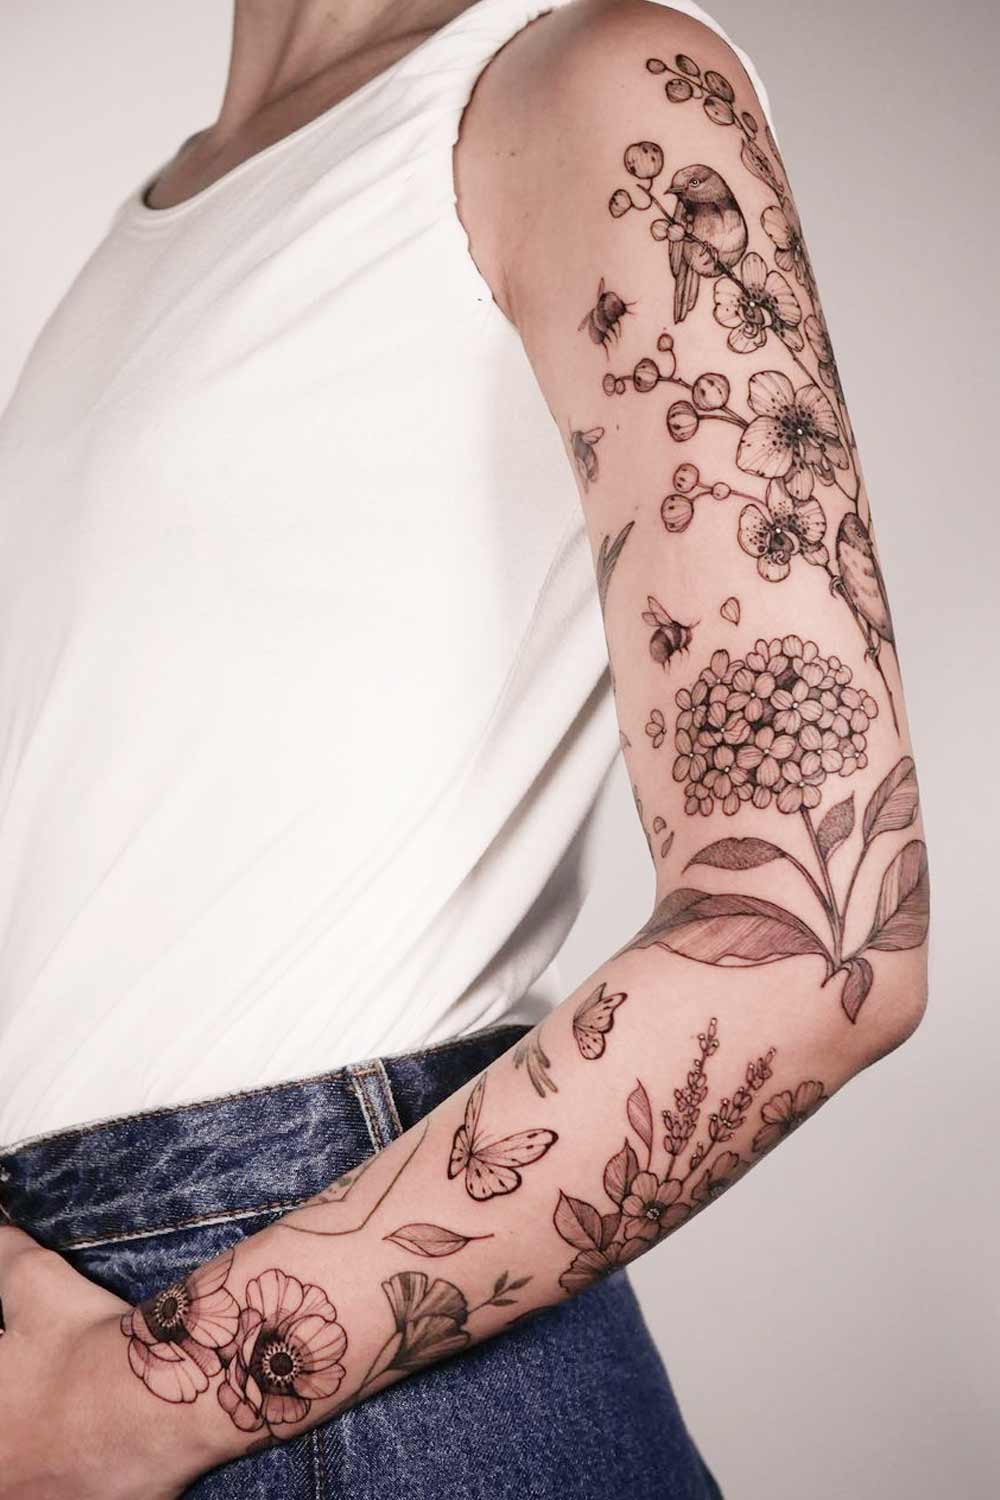 Sleeve Tattoo with Butterflies and Flowers